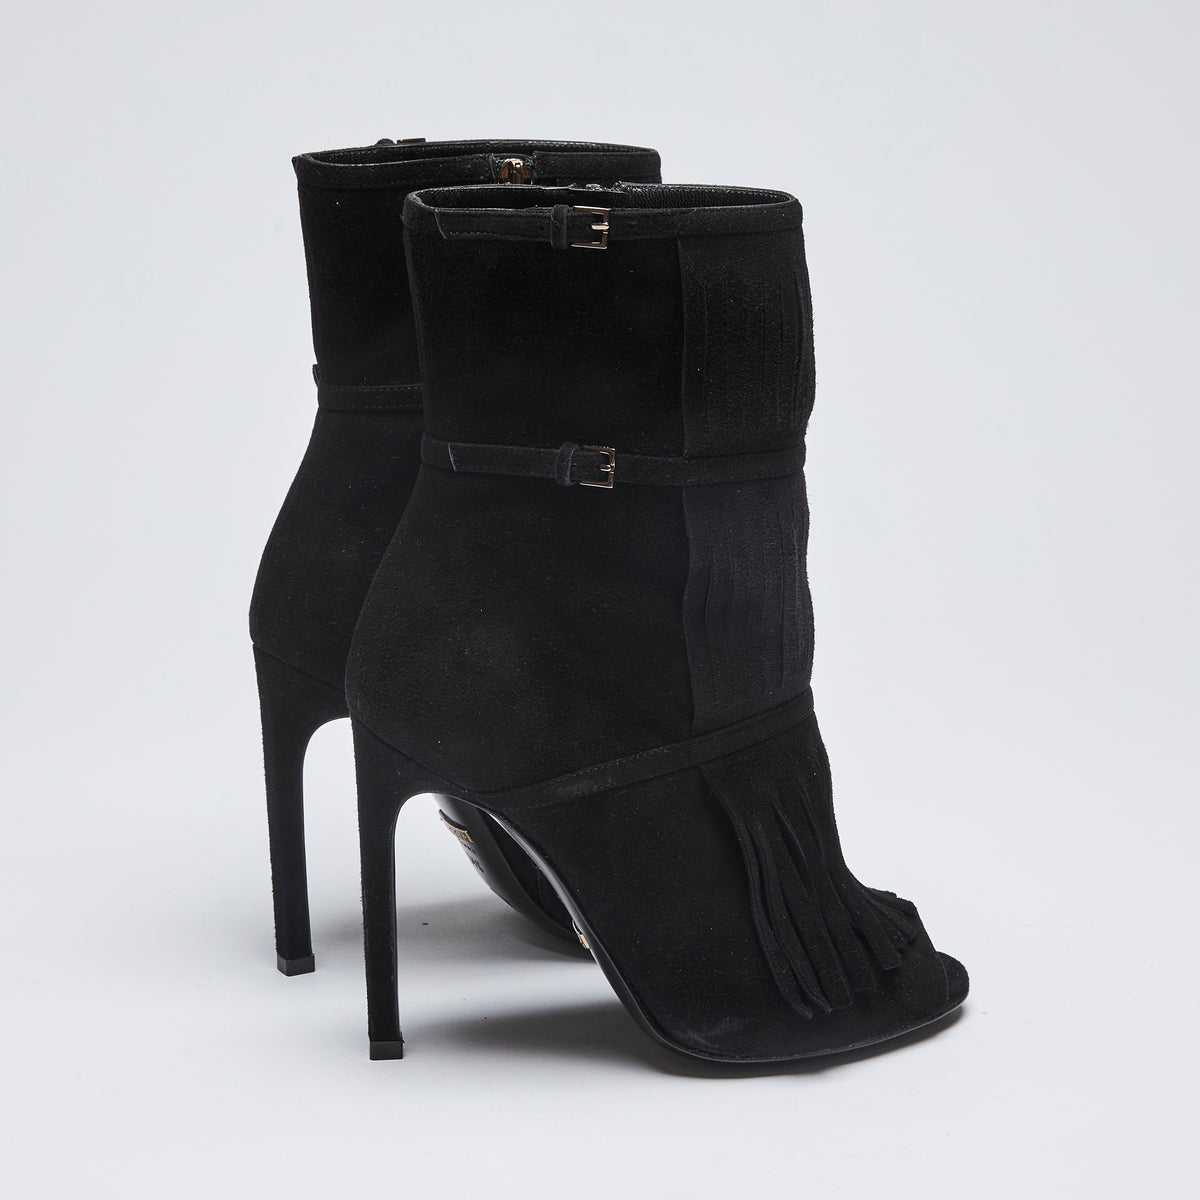 Excellent Pre-Loved Black Suede Peep Toe Ankle Boots with Thin Ankle Strap and Buckle Details(side)